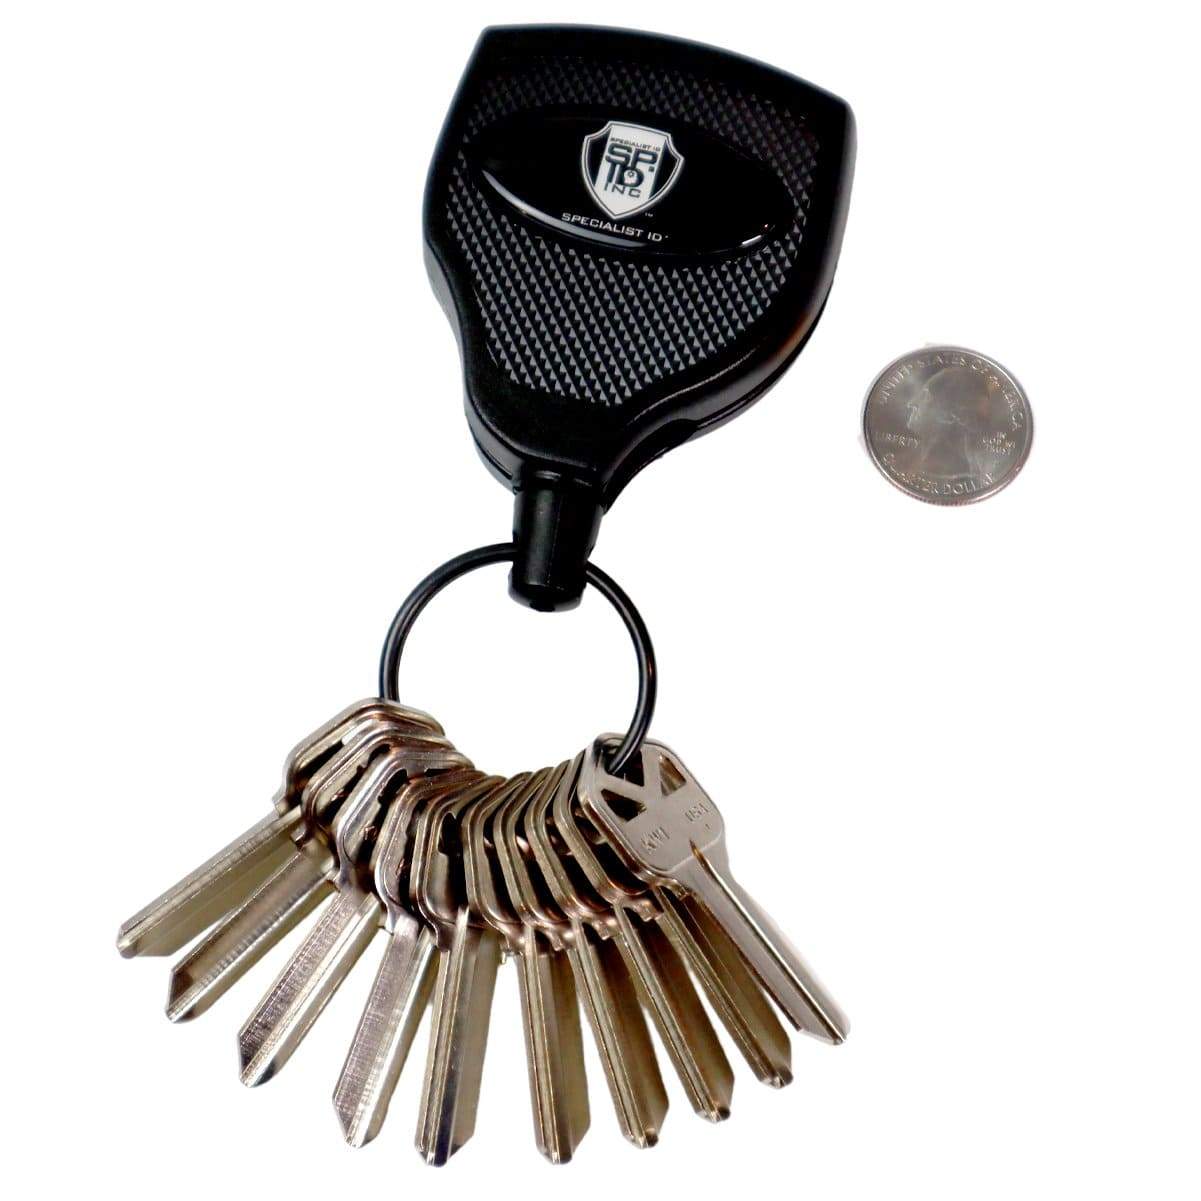 A set of keys attached to a black, textured key holder with a logo, featuring the Super Heavy Duty Retractable Keychain - 8oz or 10 Keys - Durable 48” (4 Ft) Kevlar Lanyard, placed next to a coin for size comparison.